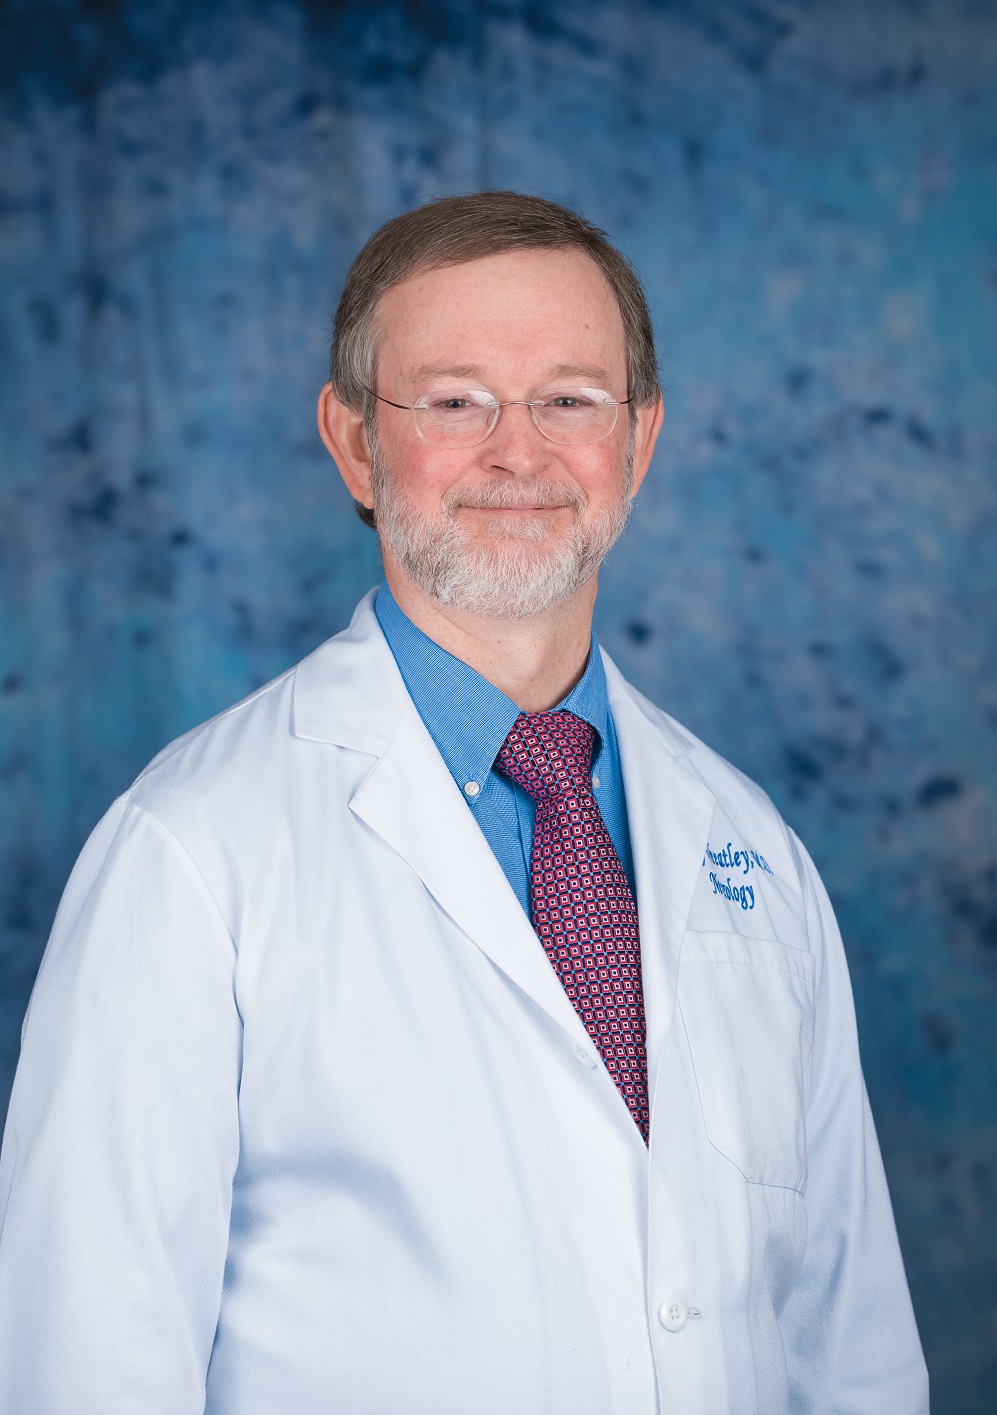 Gregory Wheatley, MD of Knoxville Neurology Specialists